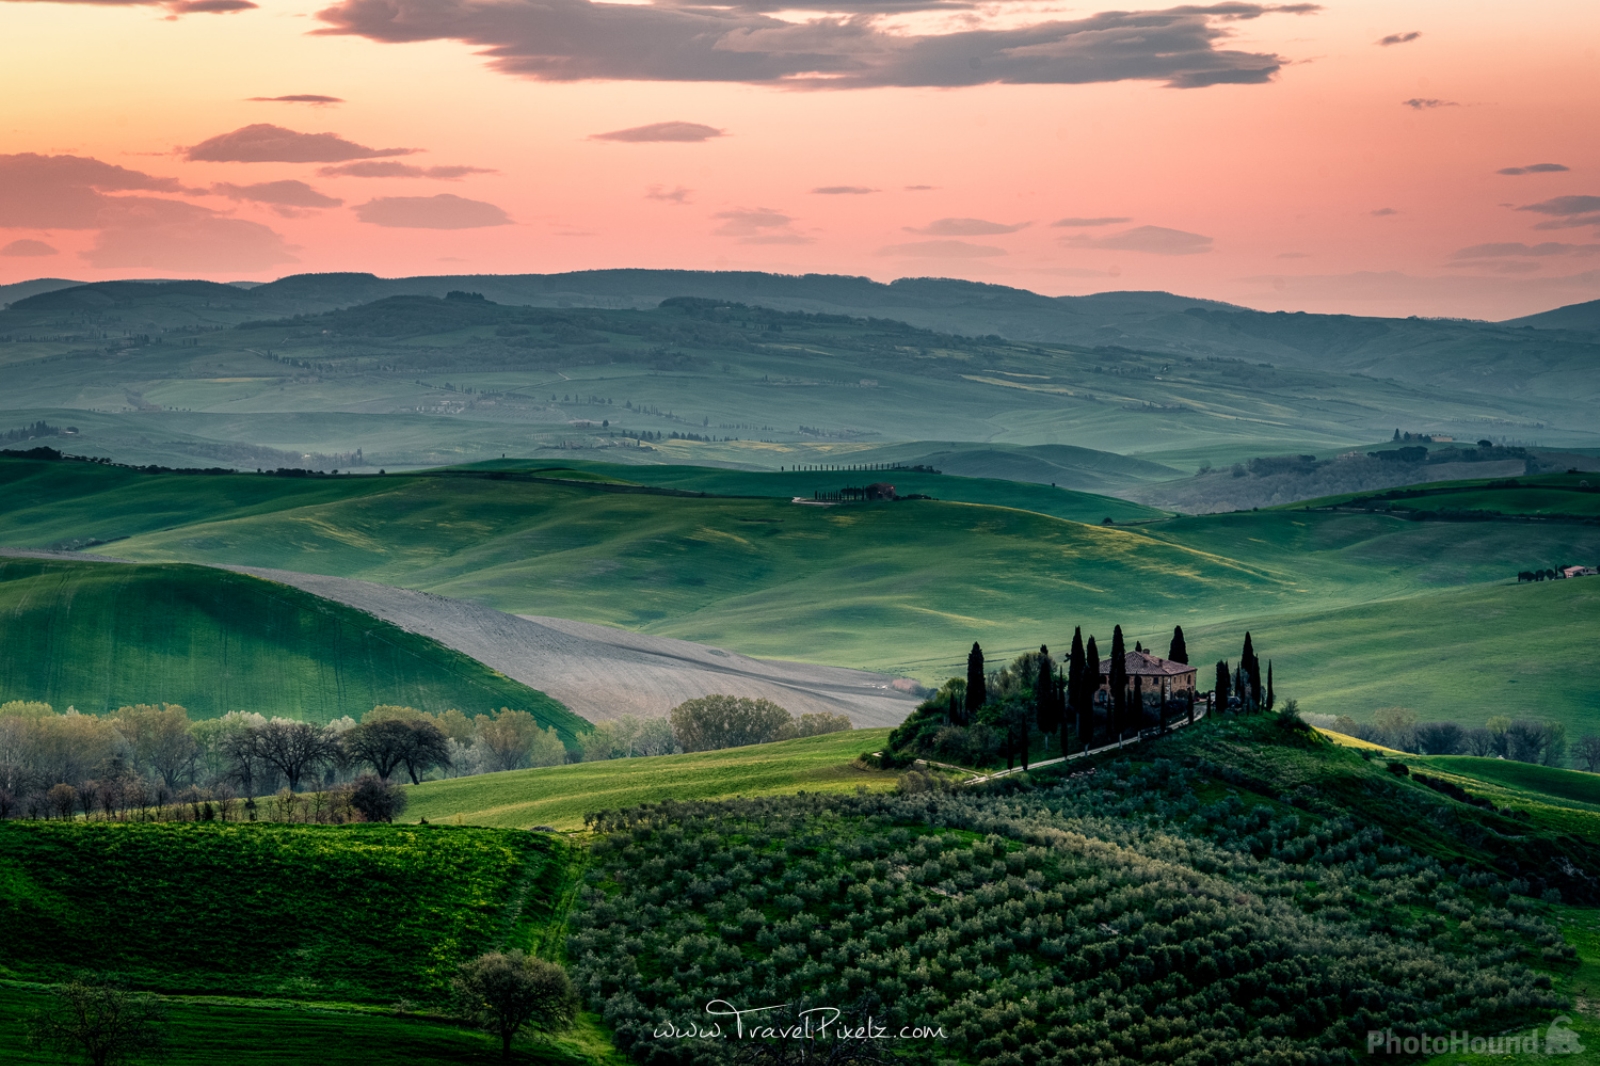 Image of Podere Belvedere by Fabian Pfitzinger